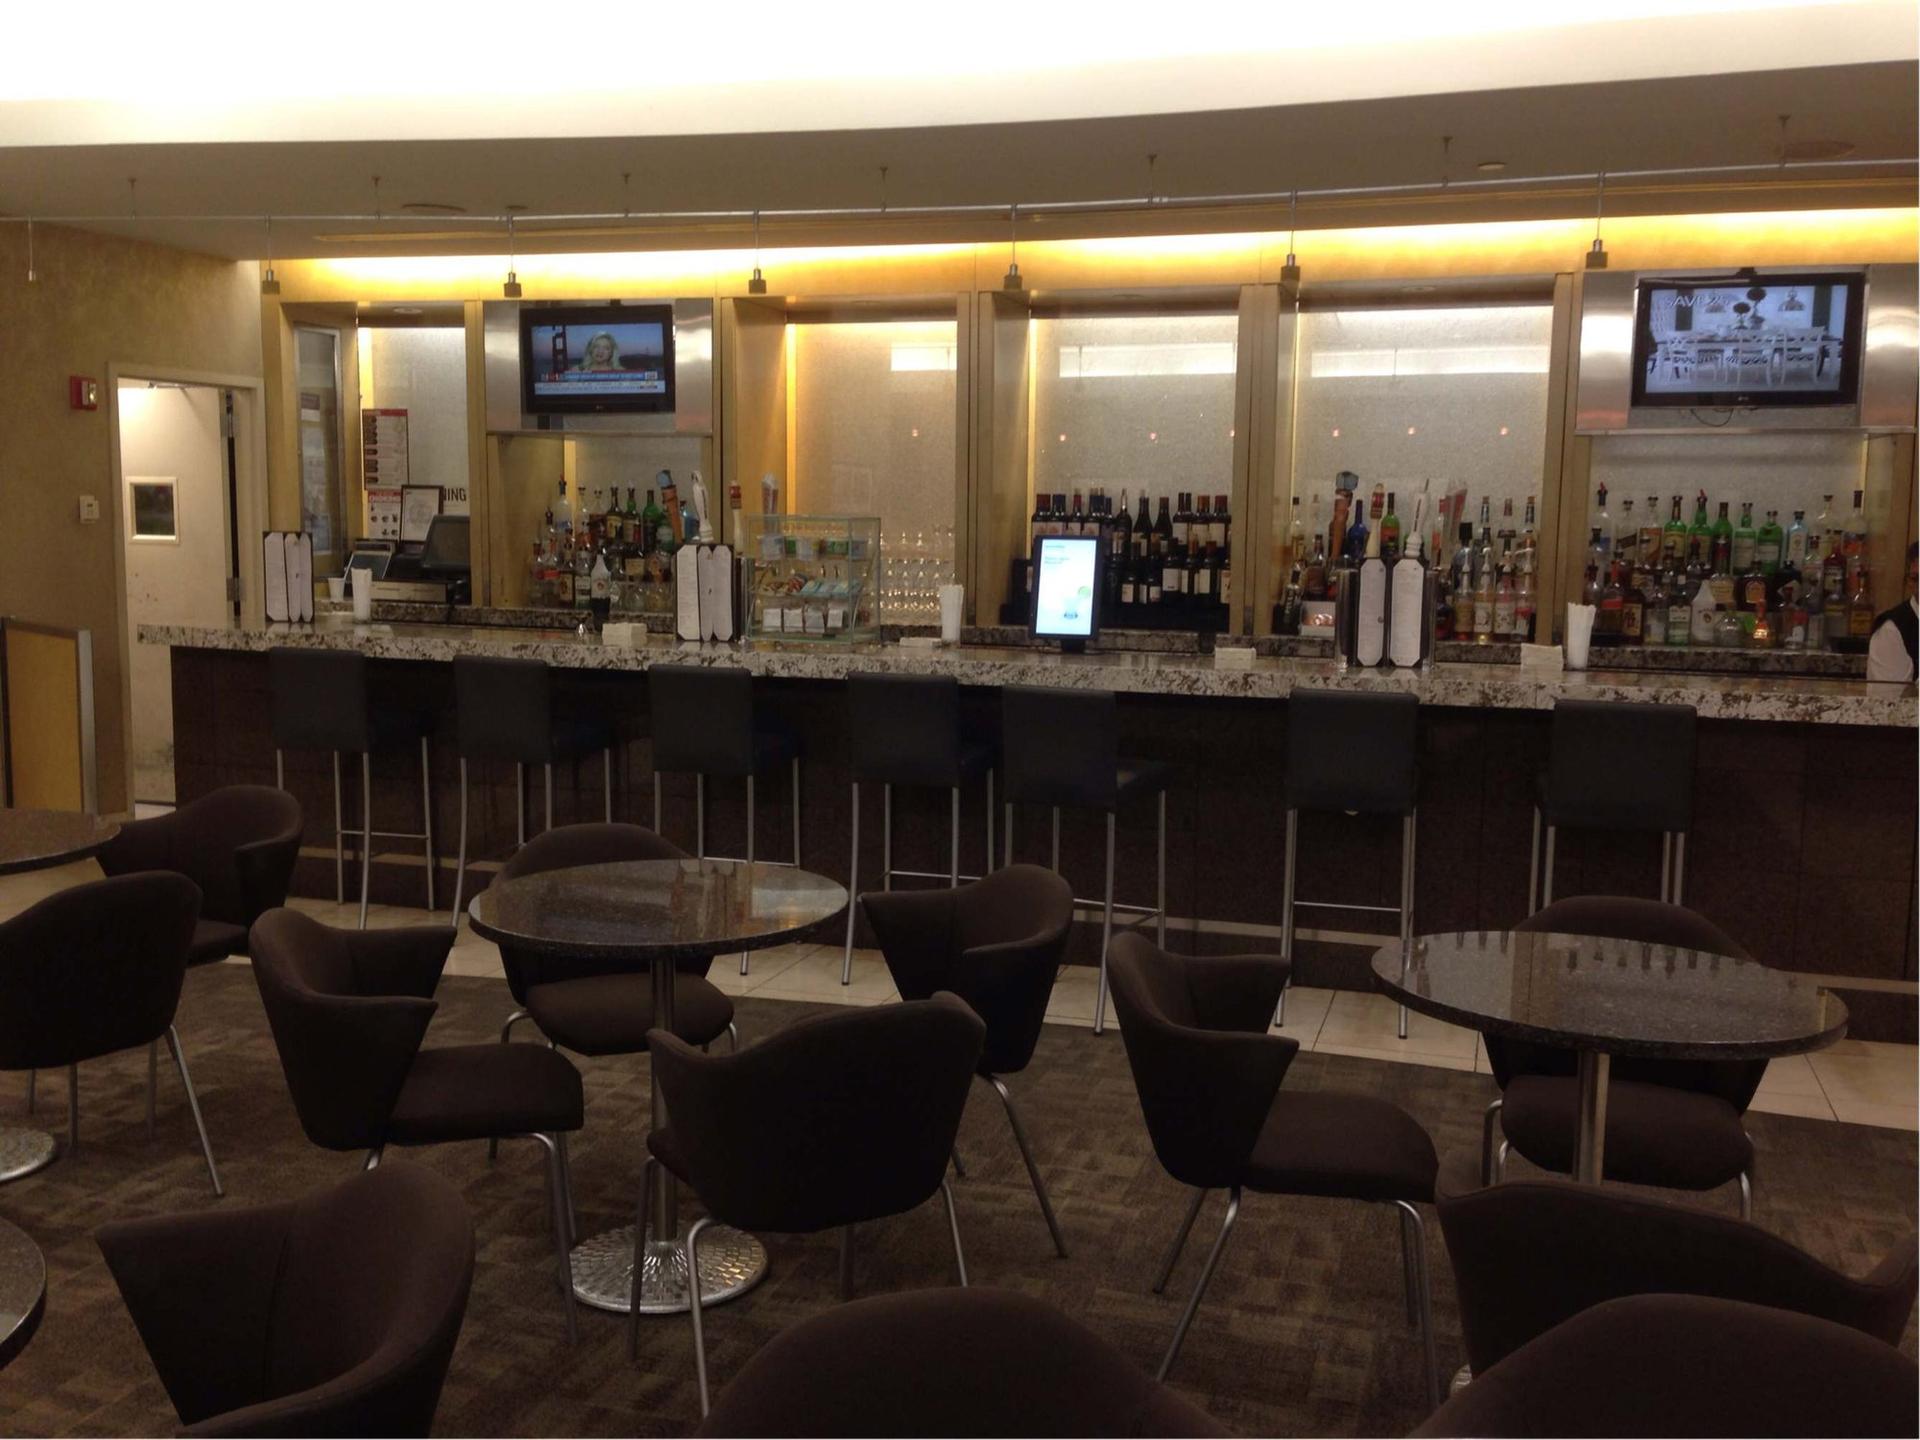 American Airlines Admirals Club image 3 of 25